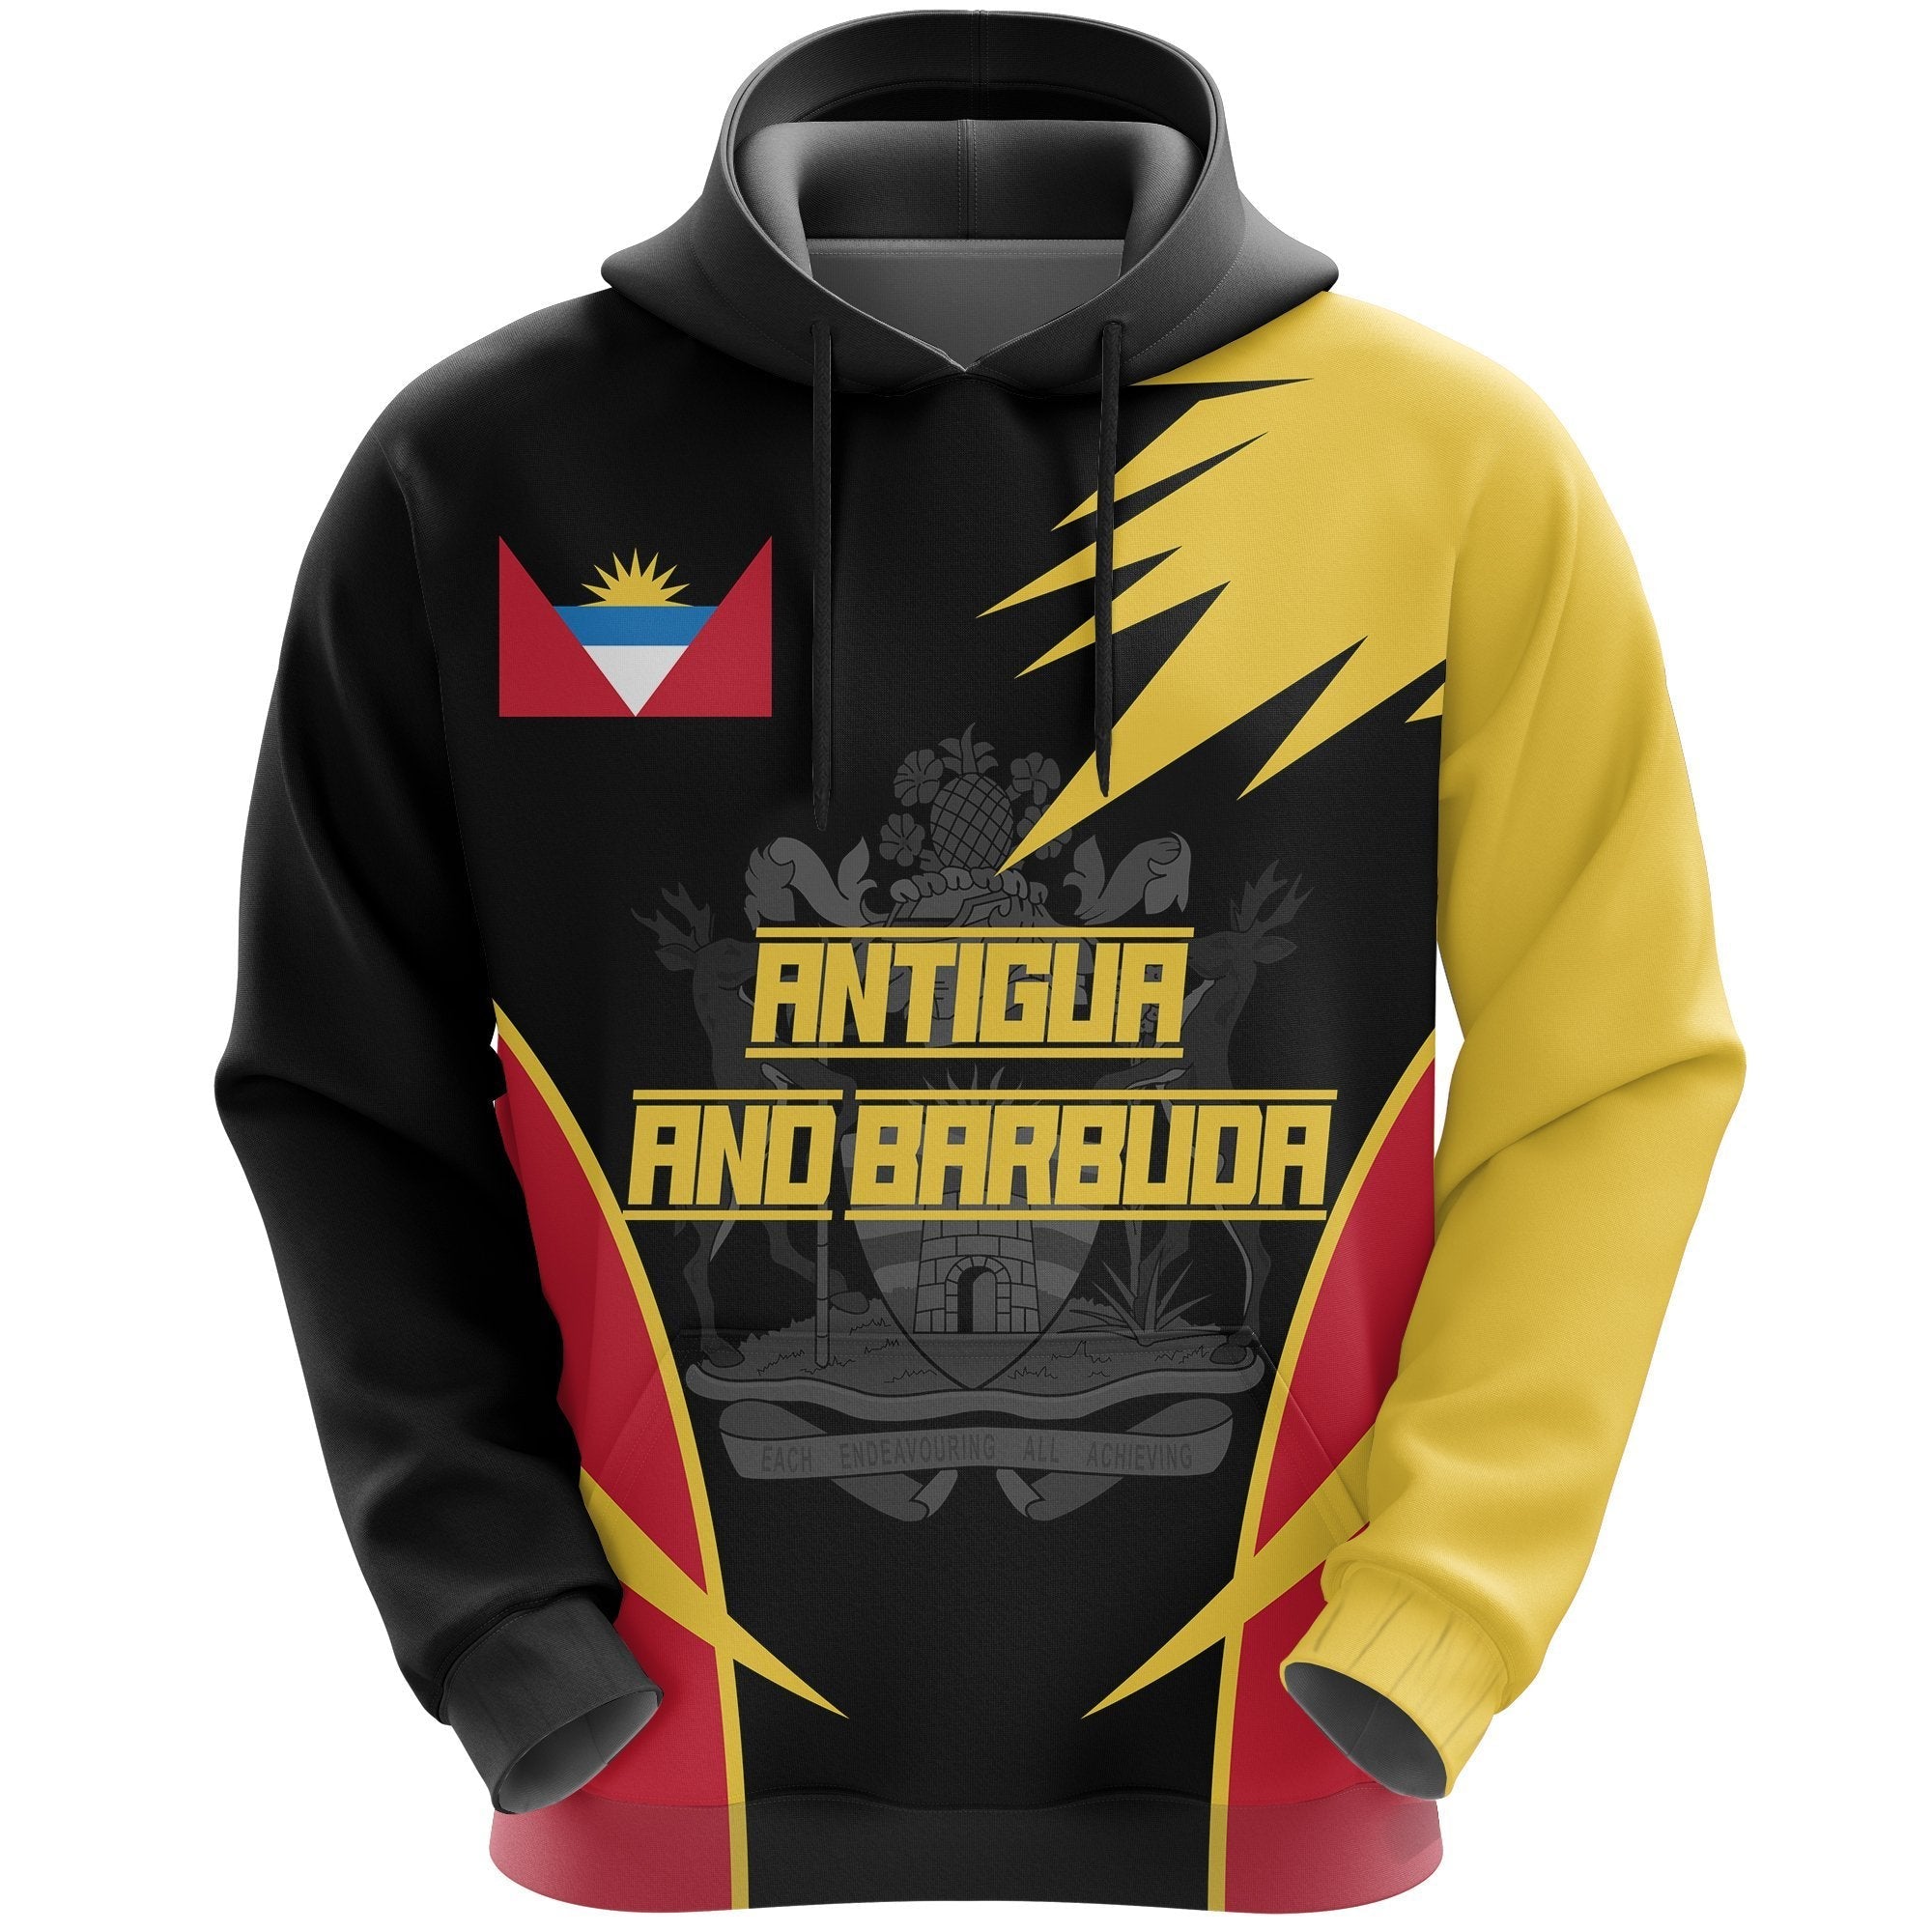 antigua-and-barbuda-hoodie-flag-and-coat-of-arms